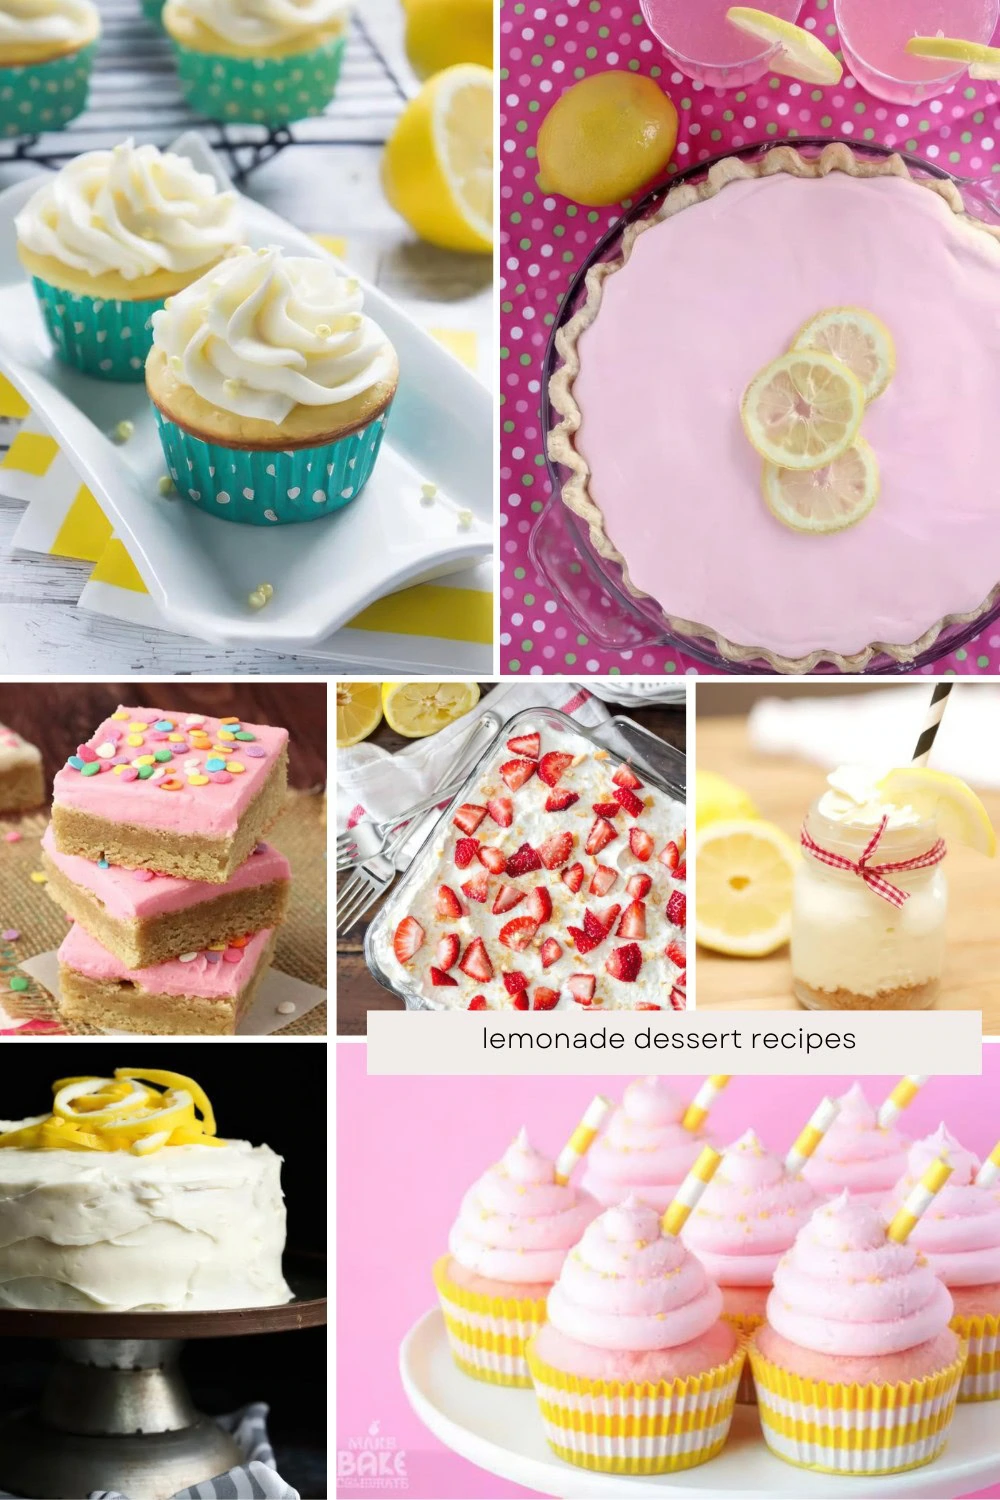 If you're a lemonade fan, you’re in for a treat! Dive into our collection of refreshing lemonade dessert recipes. From zesty pies to creamy ice creams, these recipes are a must-try. 🍨🍋 #LemonDesserts #SweetTreats